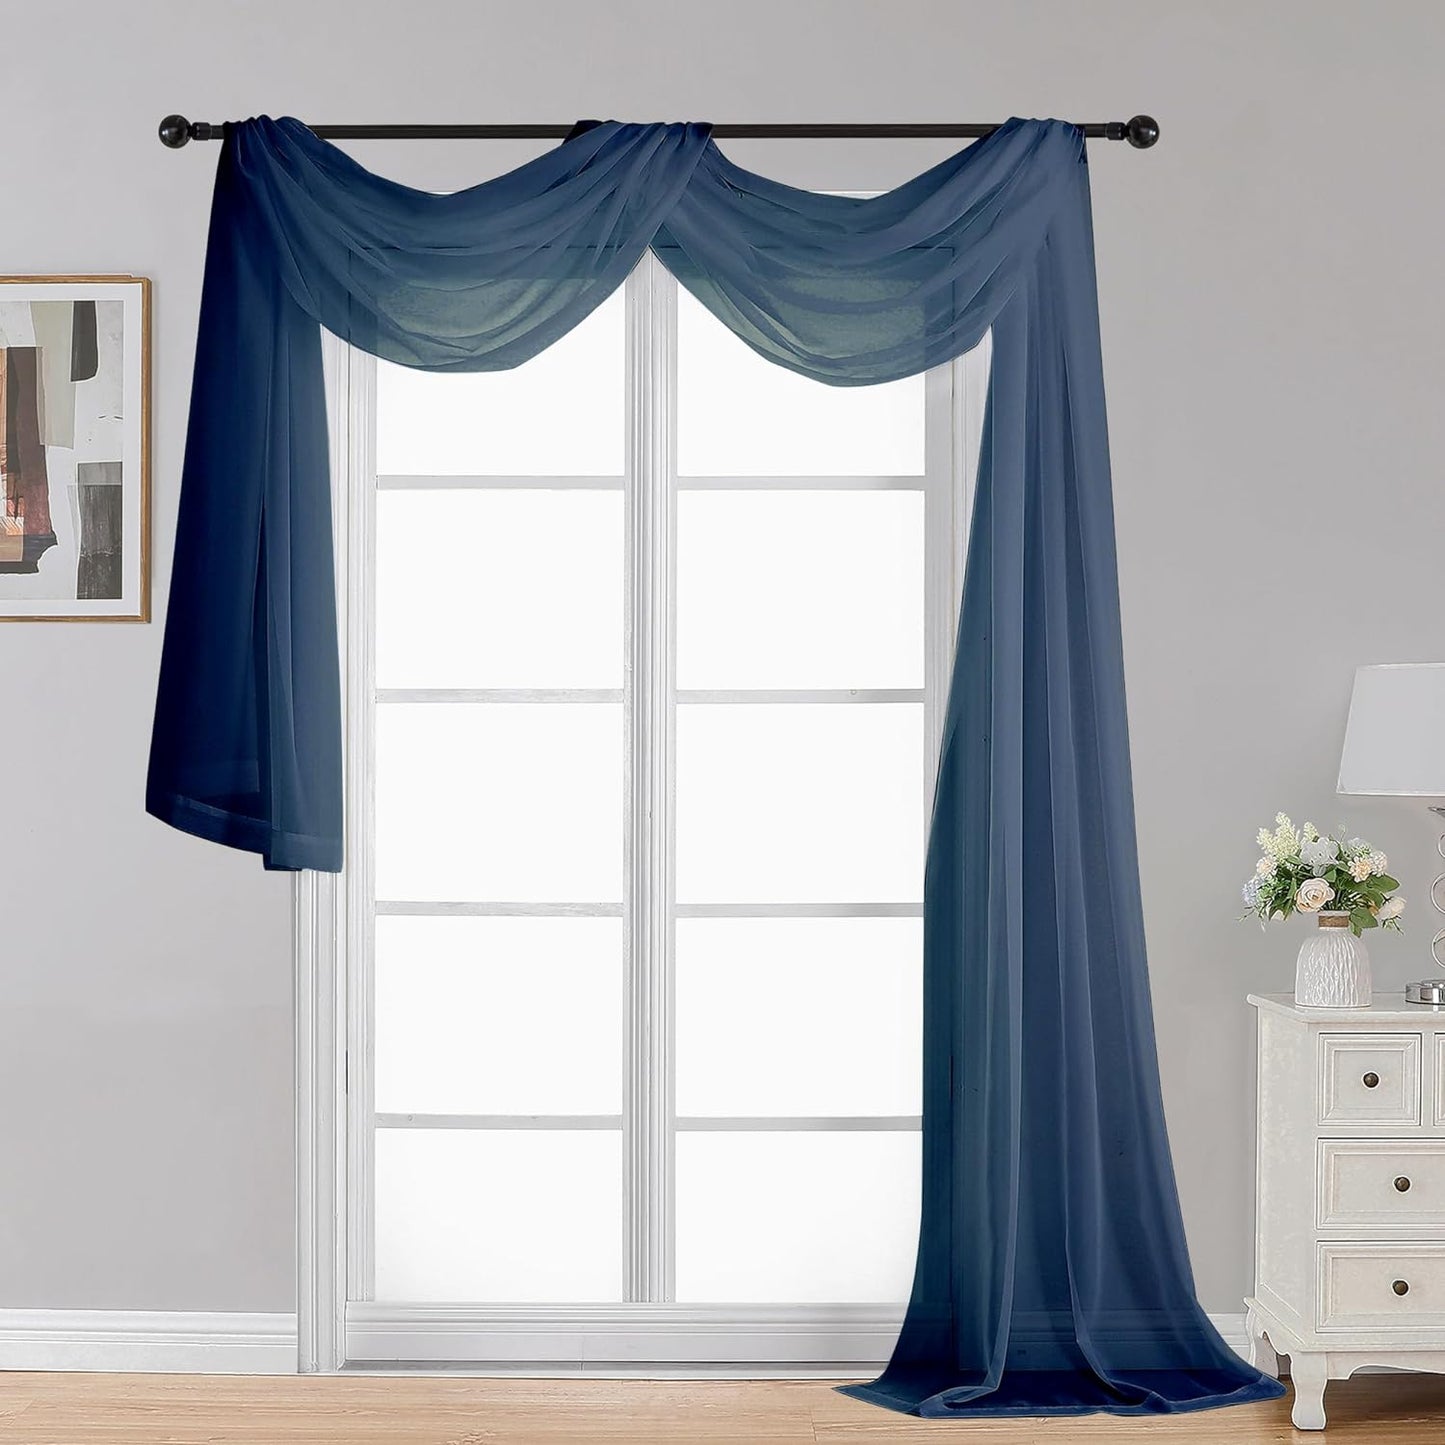 OWENIE White Sheer Valance for Window, Small Short Rod Pocket Voile Valance Curtain Window Treatment Decor for Living Room Bathroom Kitchen Cafe Laundry Basement, 60" W X 14" L  OWENIE Navy Blue 42W X 216L 